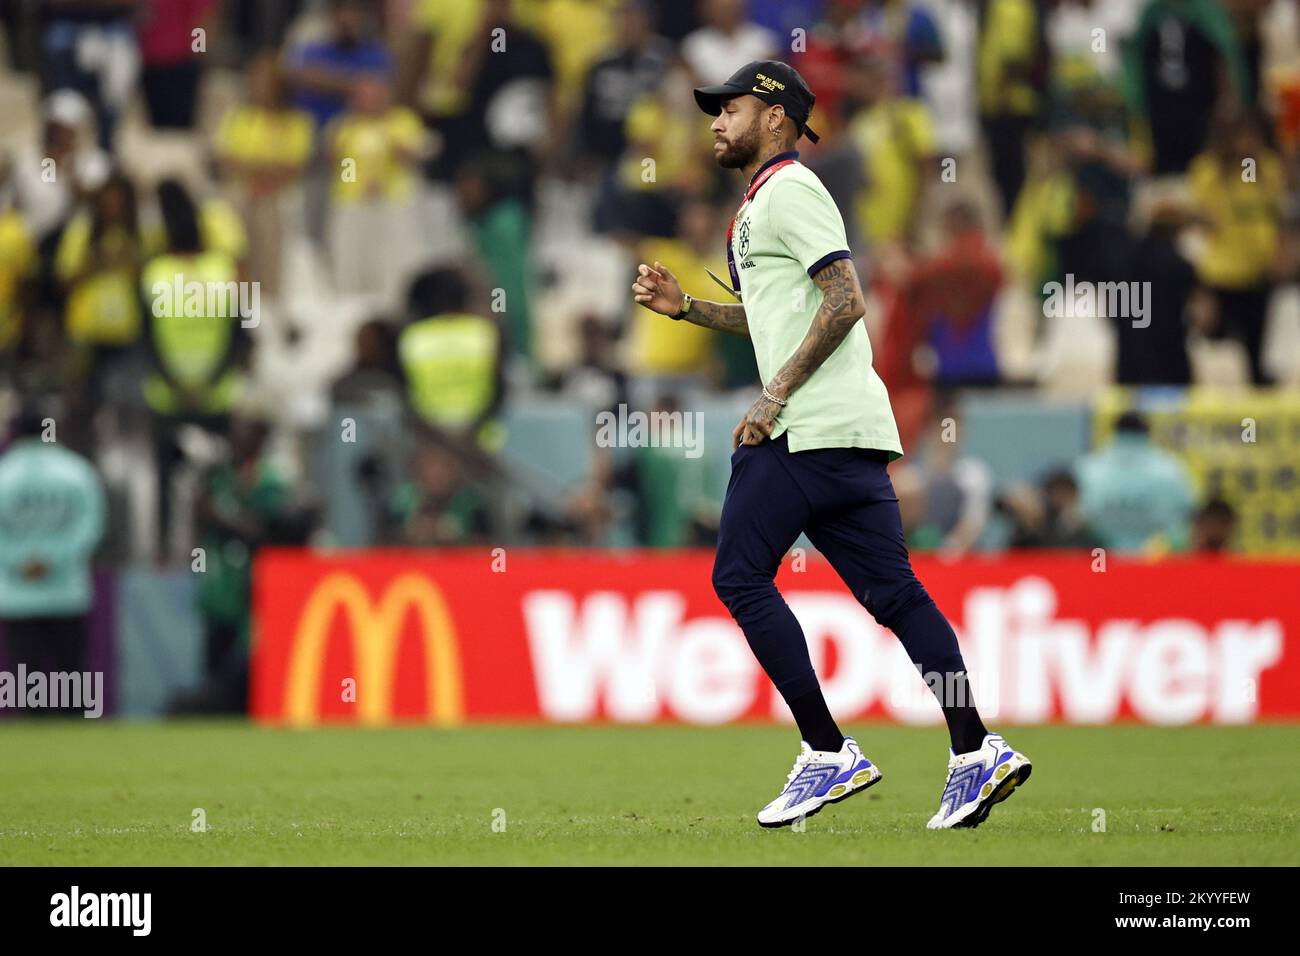 Qatar. 02nd Dec, 2022. LUSAIL CITY - Neymar of Brazil during the FIFA World Cup Qatar 2022 group G match between Cameroon and Brazil at Lusail Stadium on December 2, 2022 in Lusail City, Qatar. AP | Dutch Height | MAURICE OF STONE Credit: ANP/Alamy Live News Stock Photo